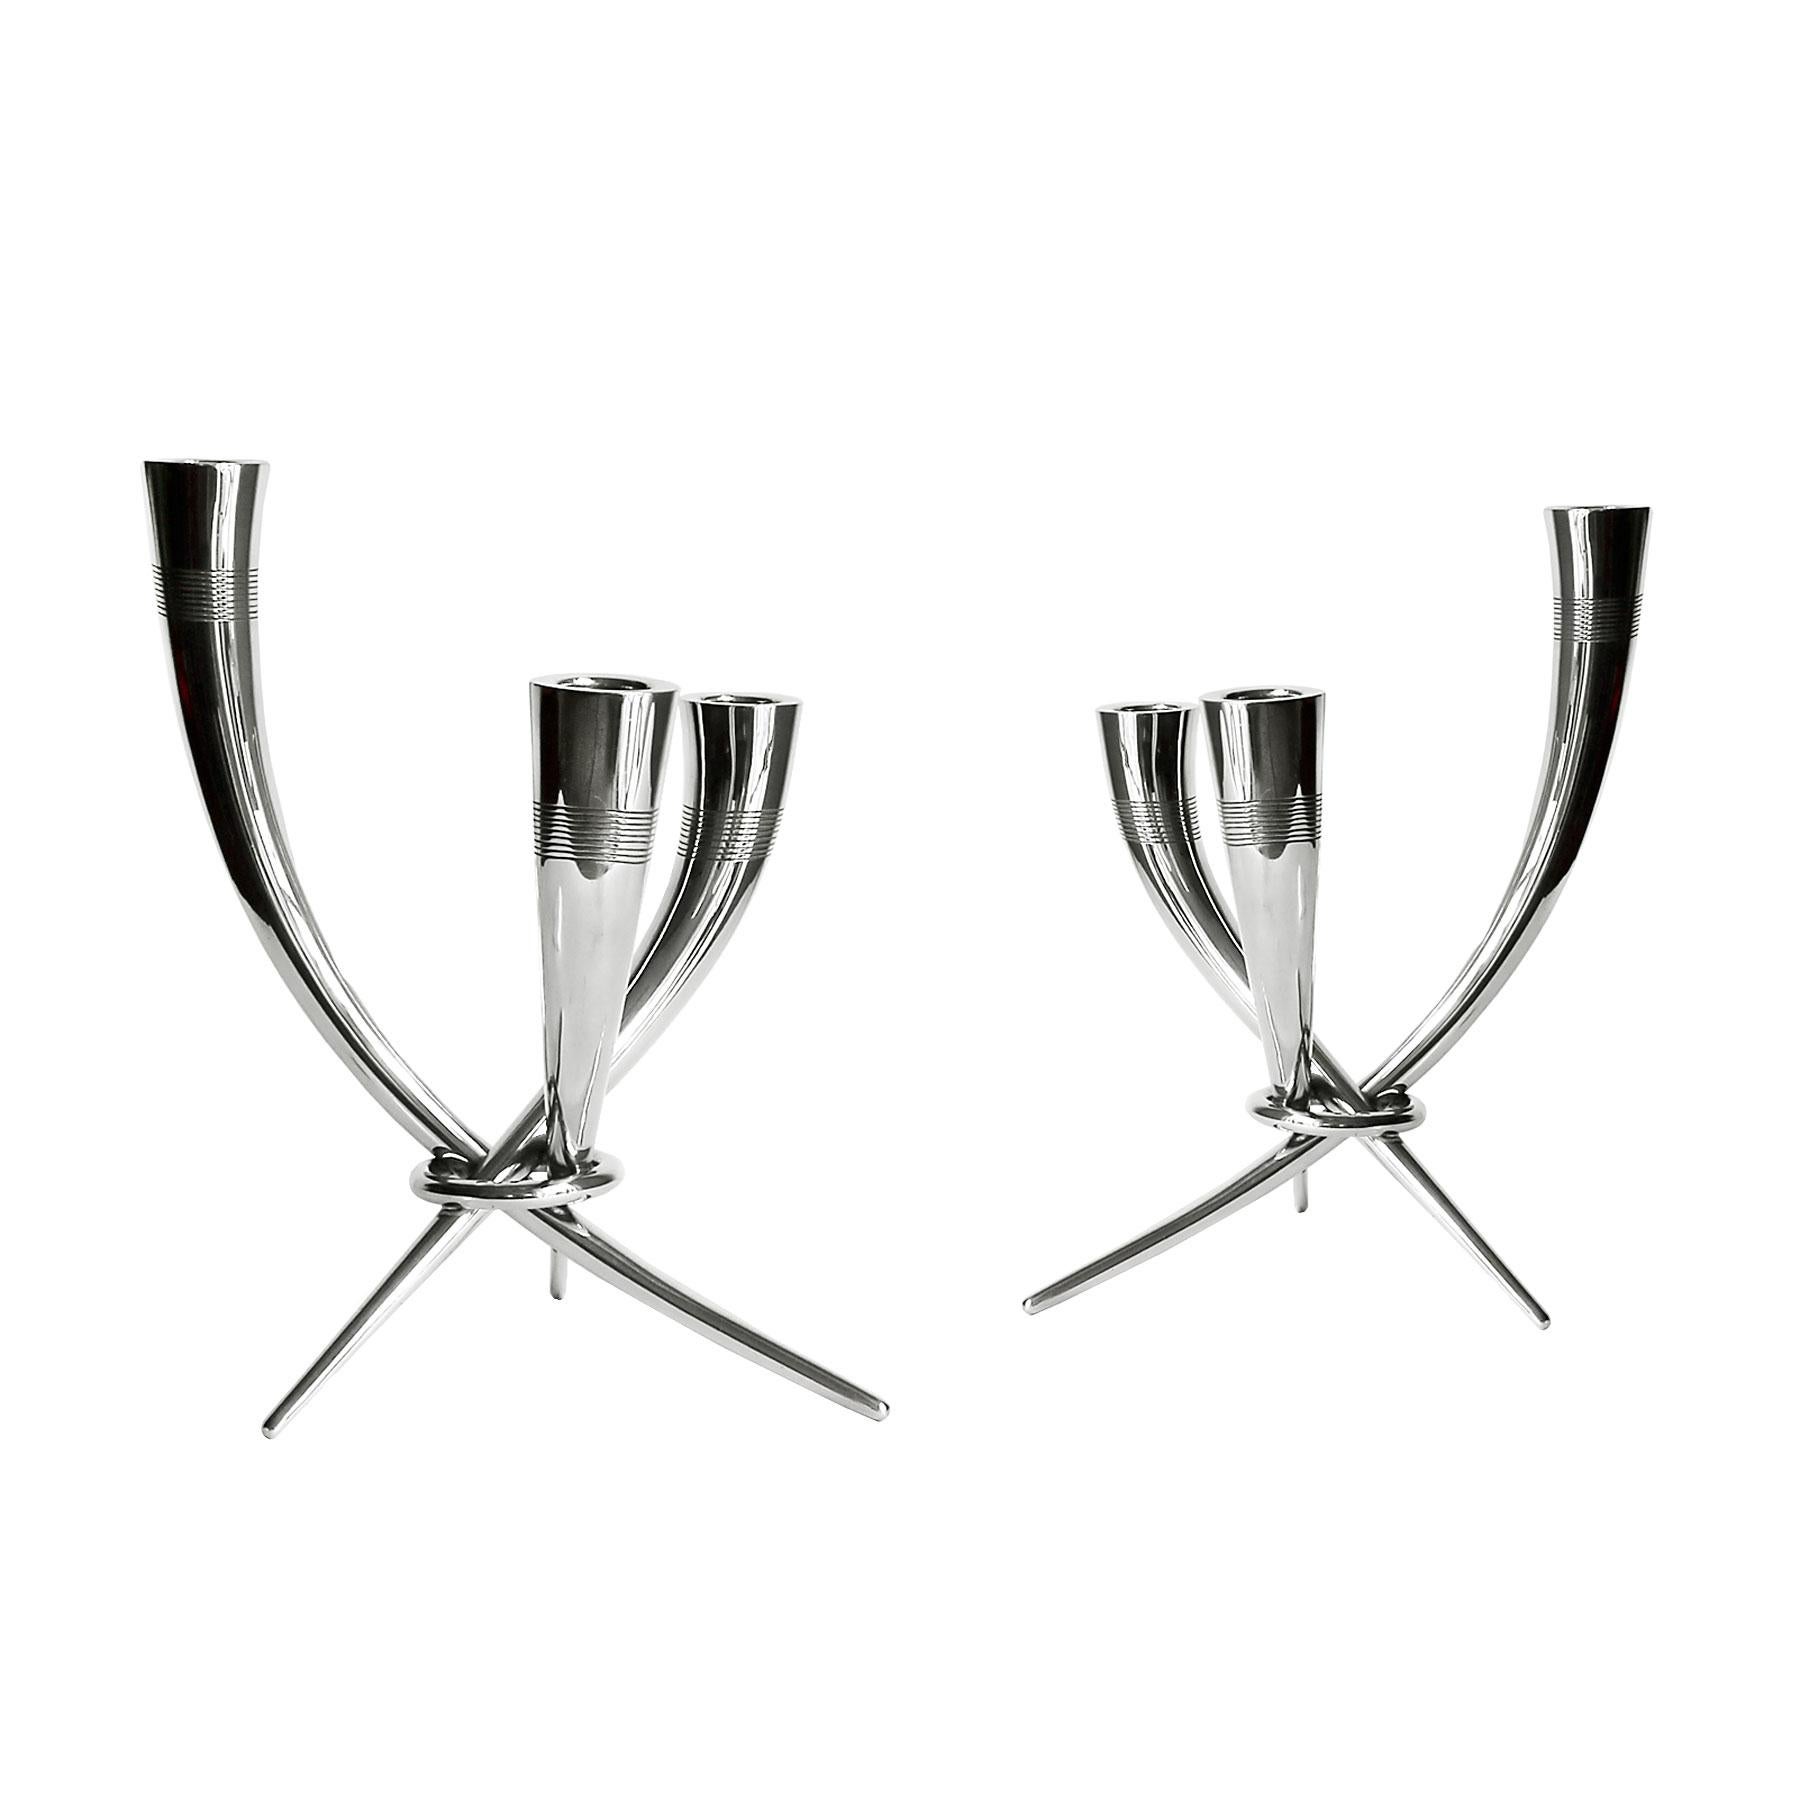 Pair of candelabrum, sterling silver, three branches, strips decoration on top.
Stamps: 